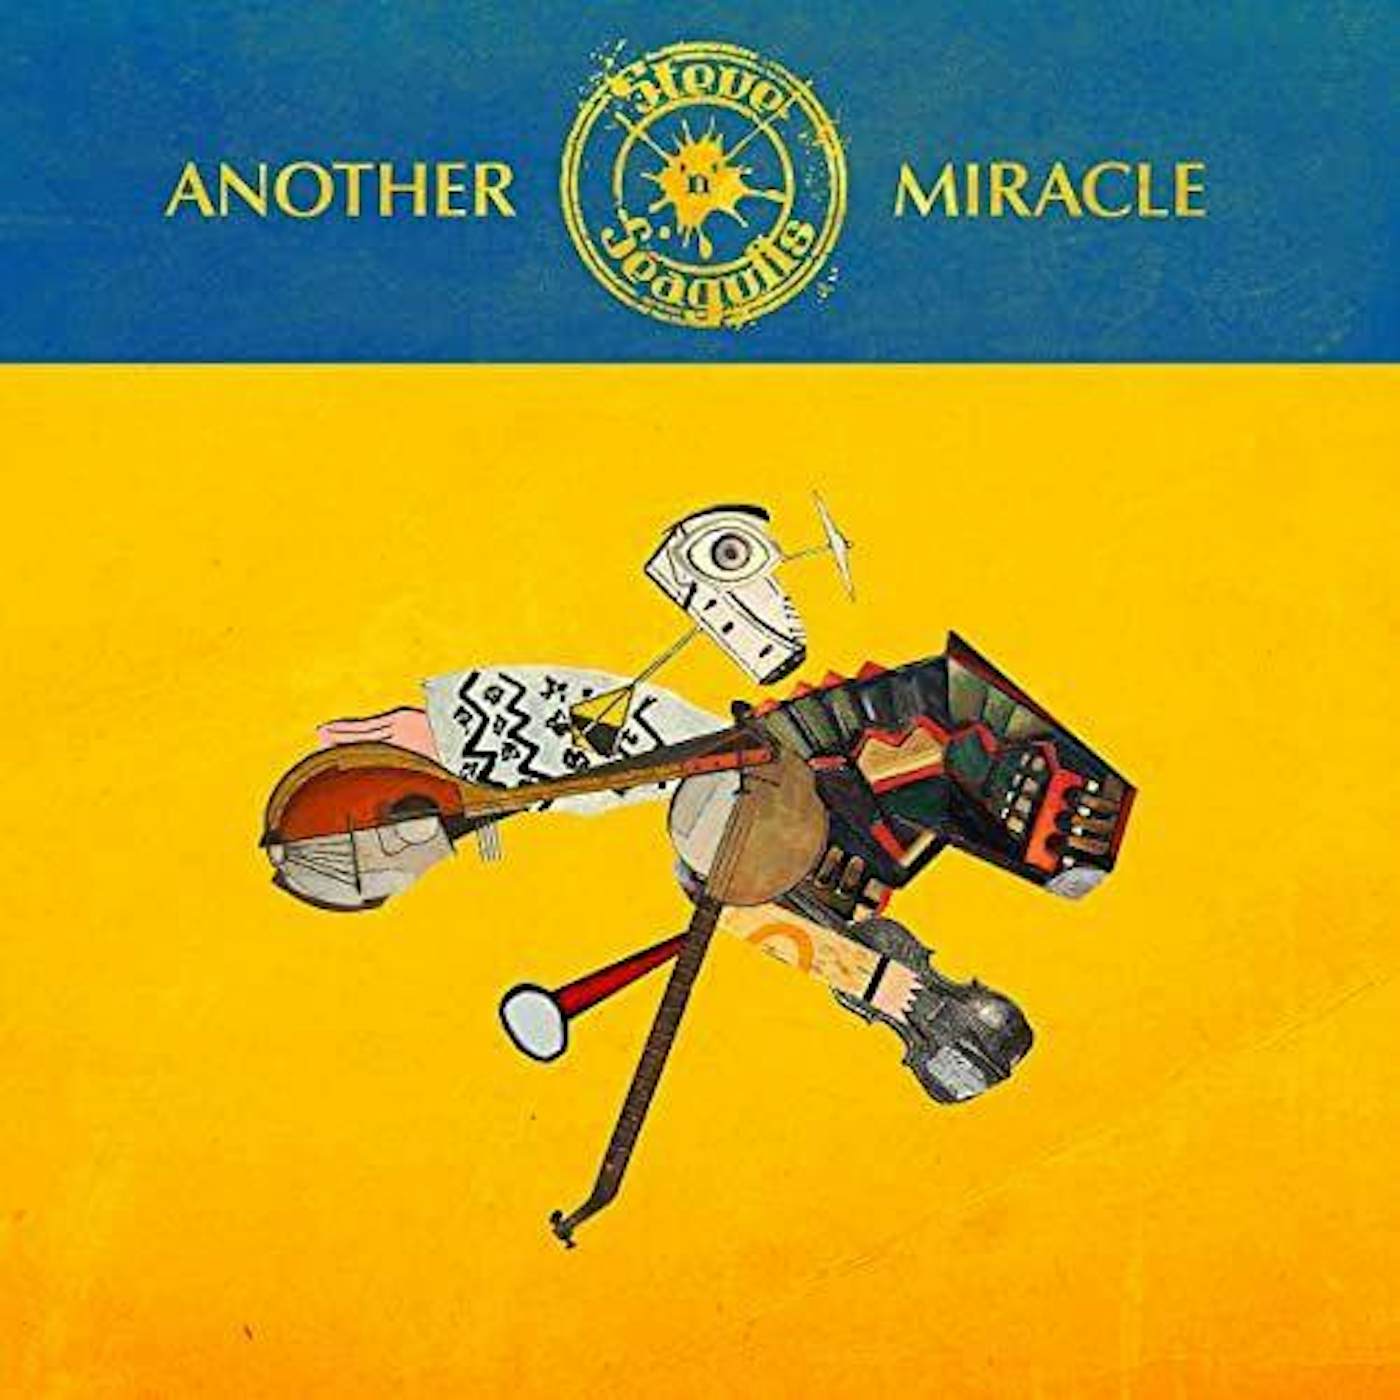 Steve ´n´ Seagulls 579156579156 ANOTHER MIRACLE CD